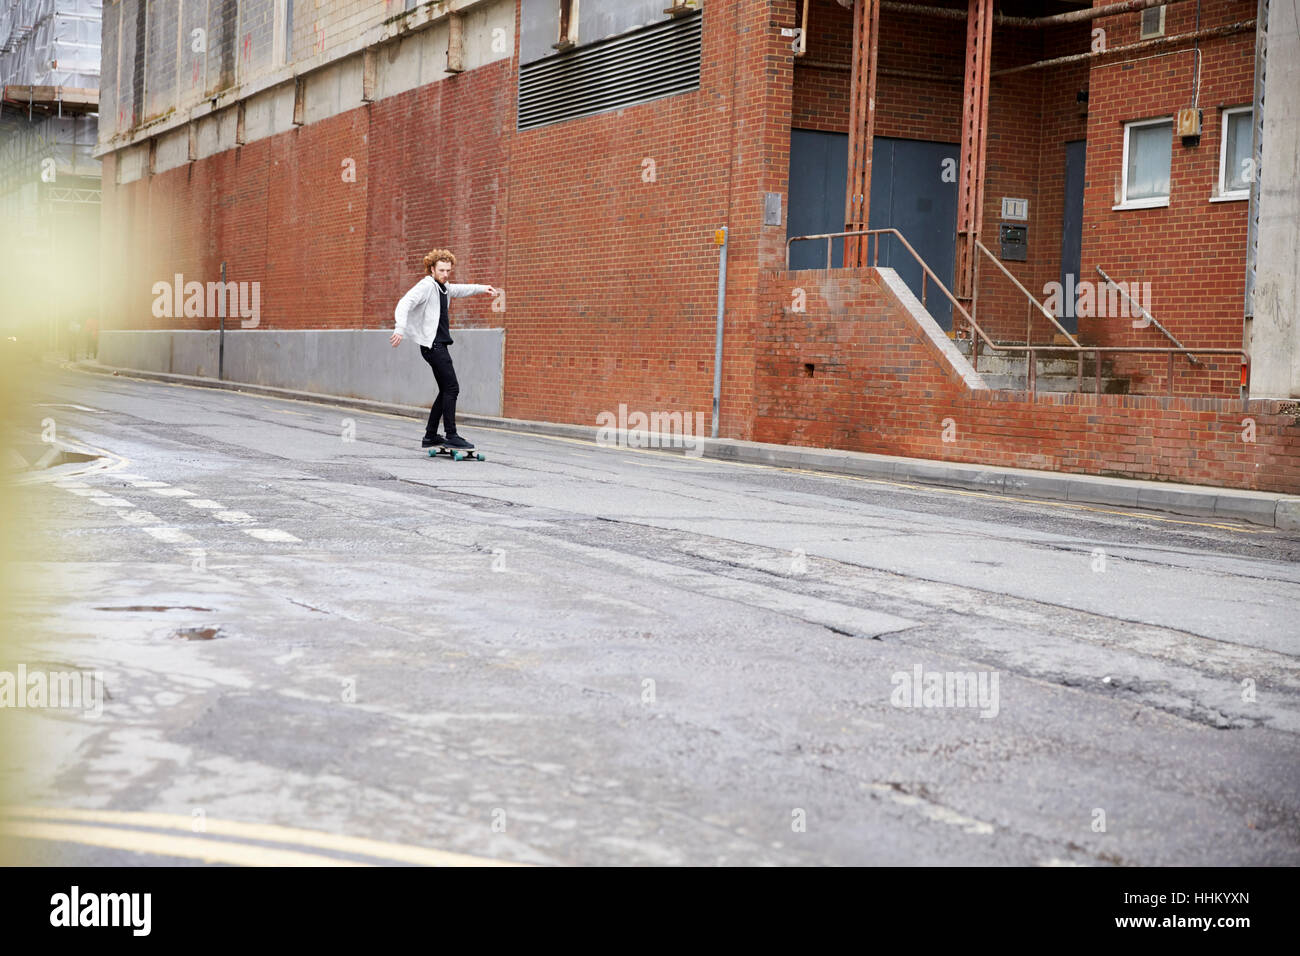 Distant red haired man skateboarding on an urban road Stock Photo